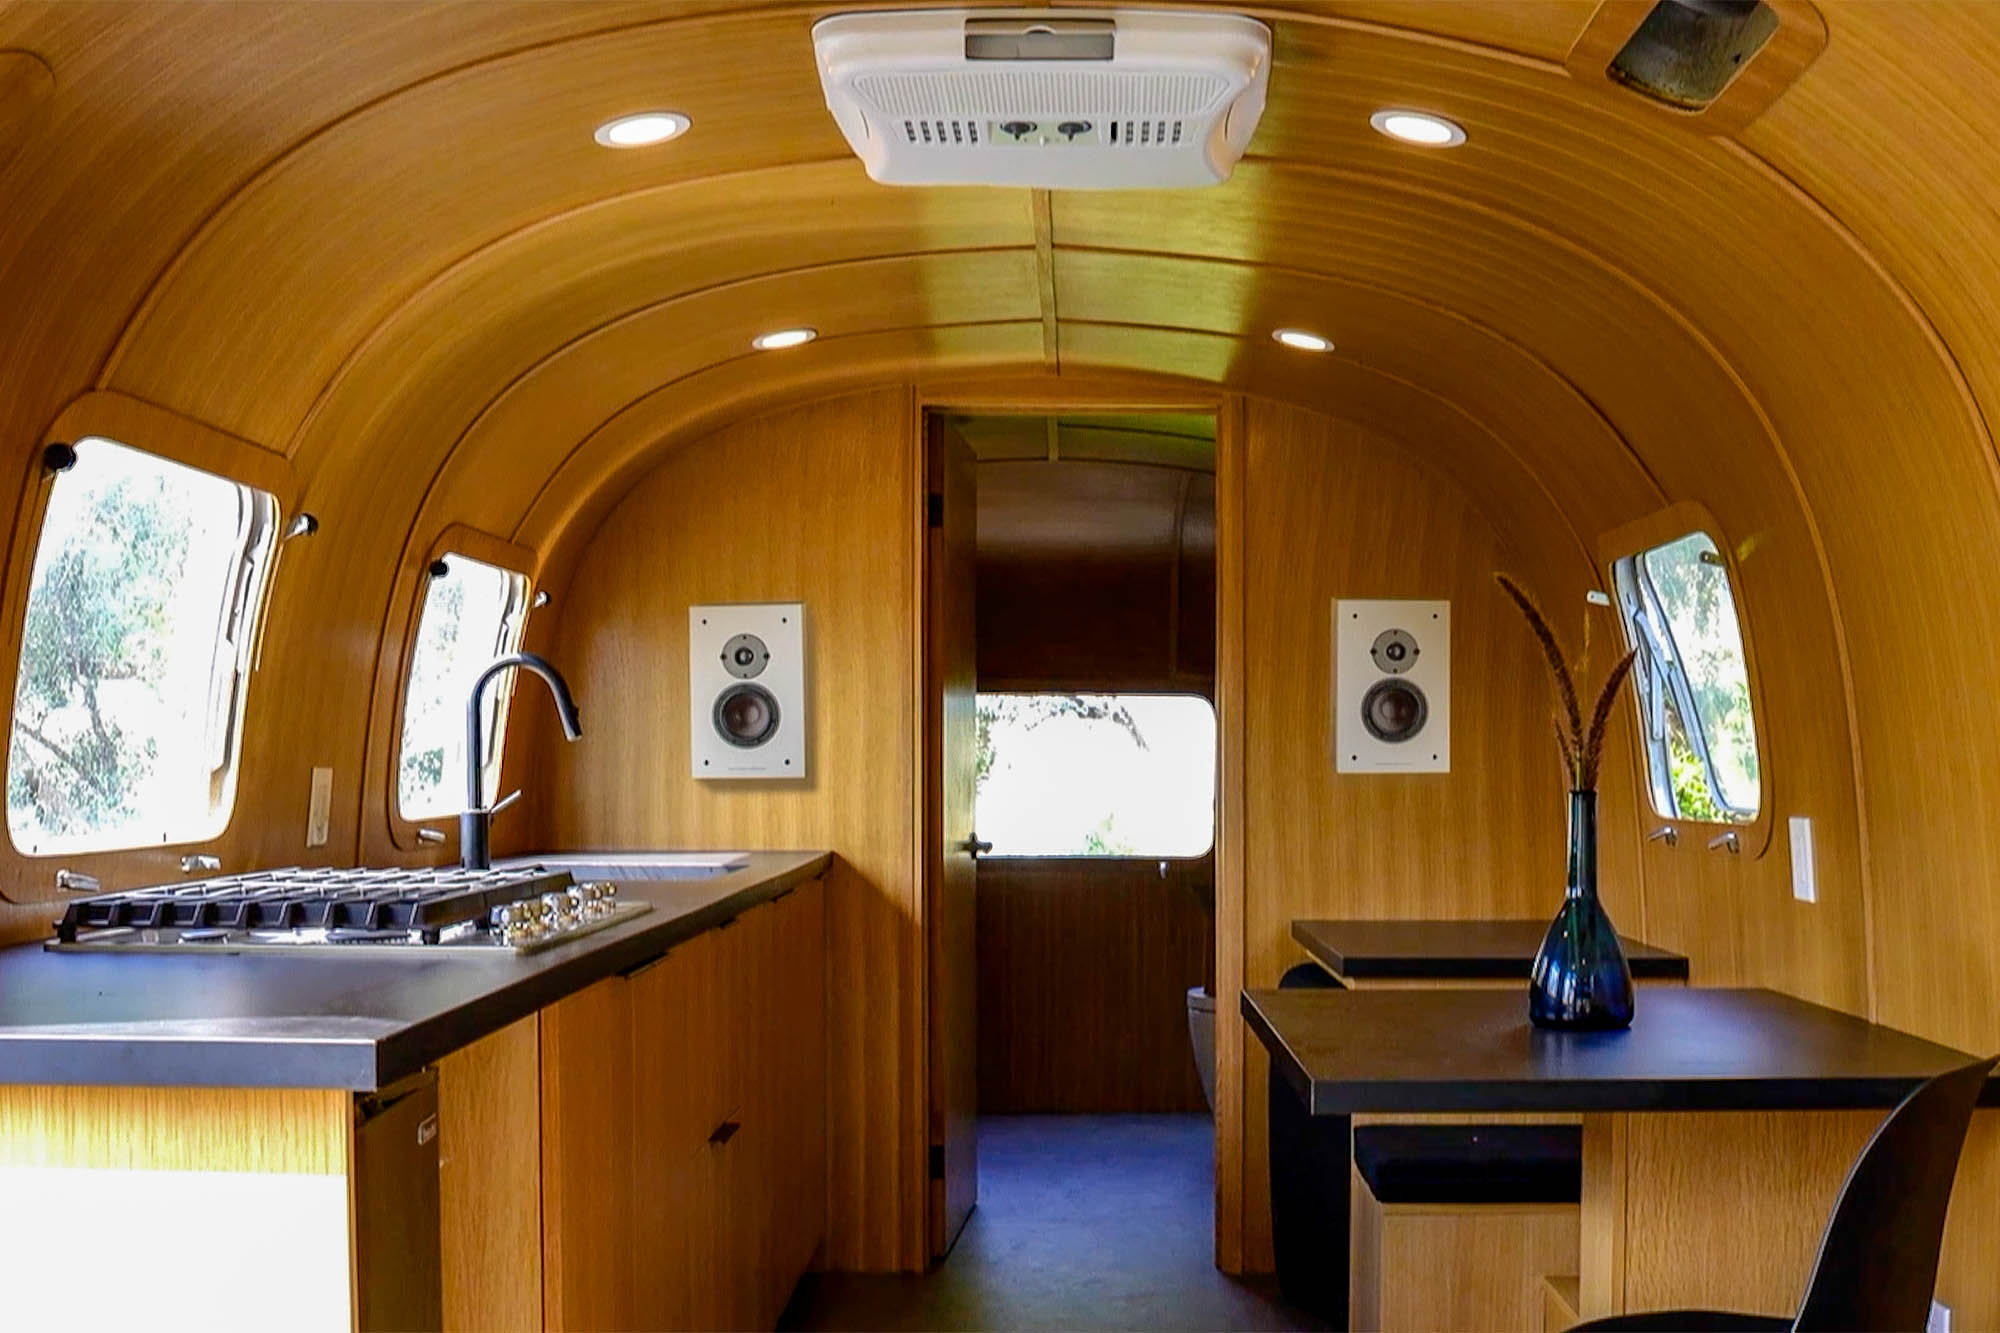 The interior of an Airstream. Walls lined with wood panels.